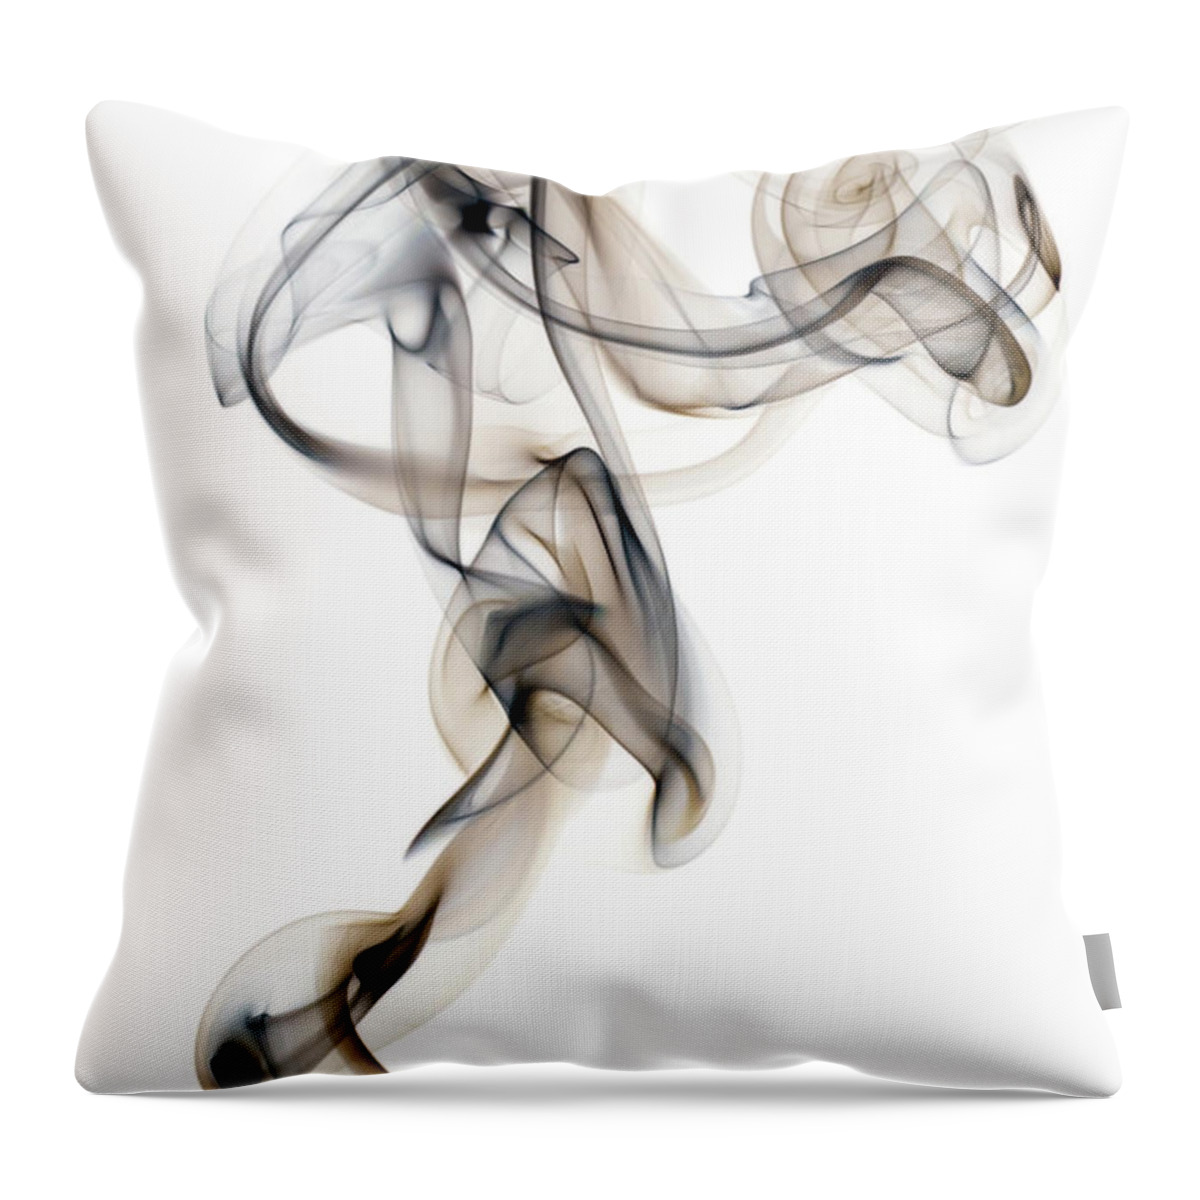 White Background Throw Pillow featuring the photograph Incense Smoke by Vando Nascimento